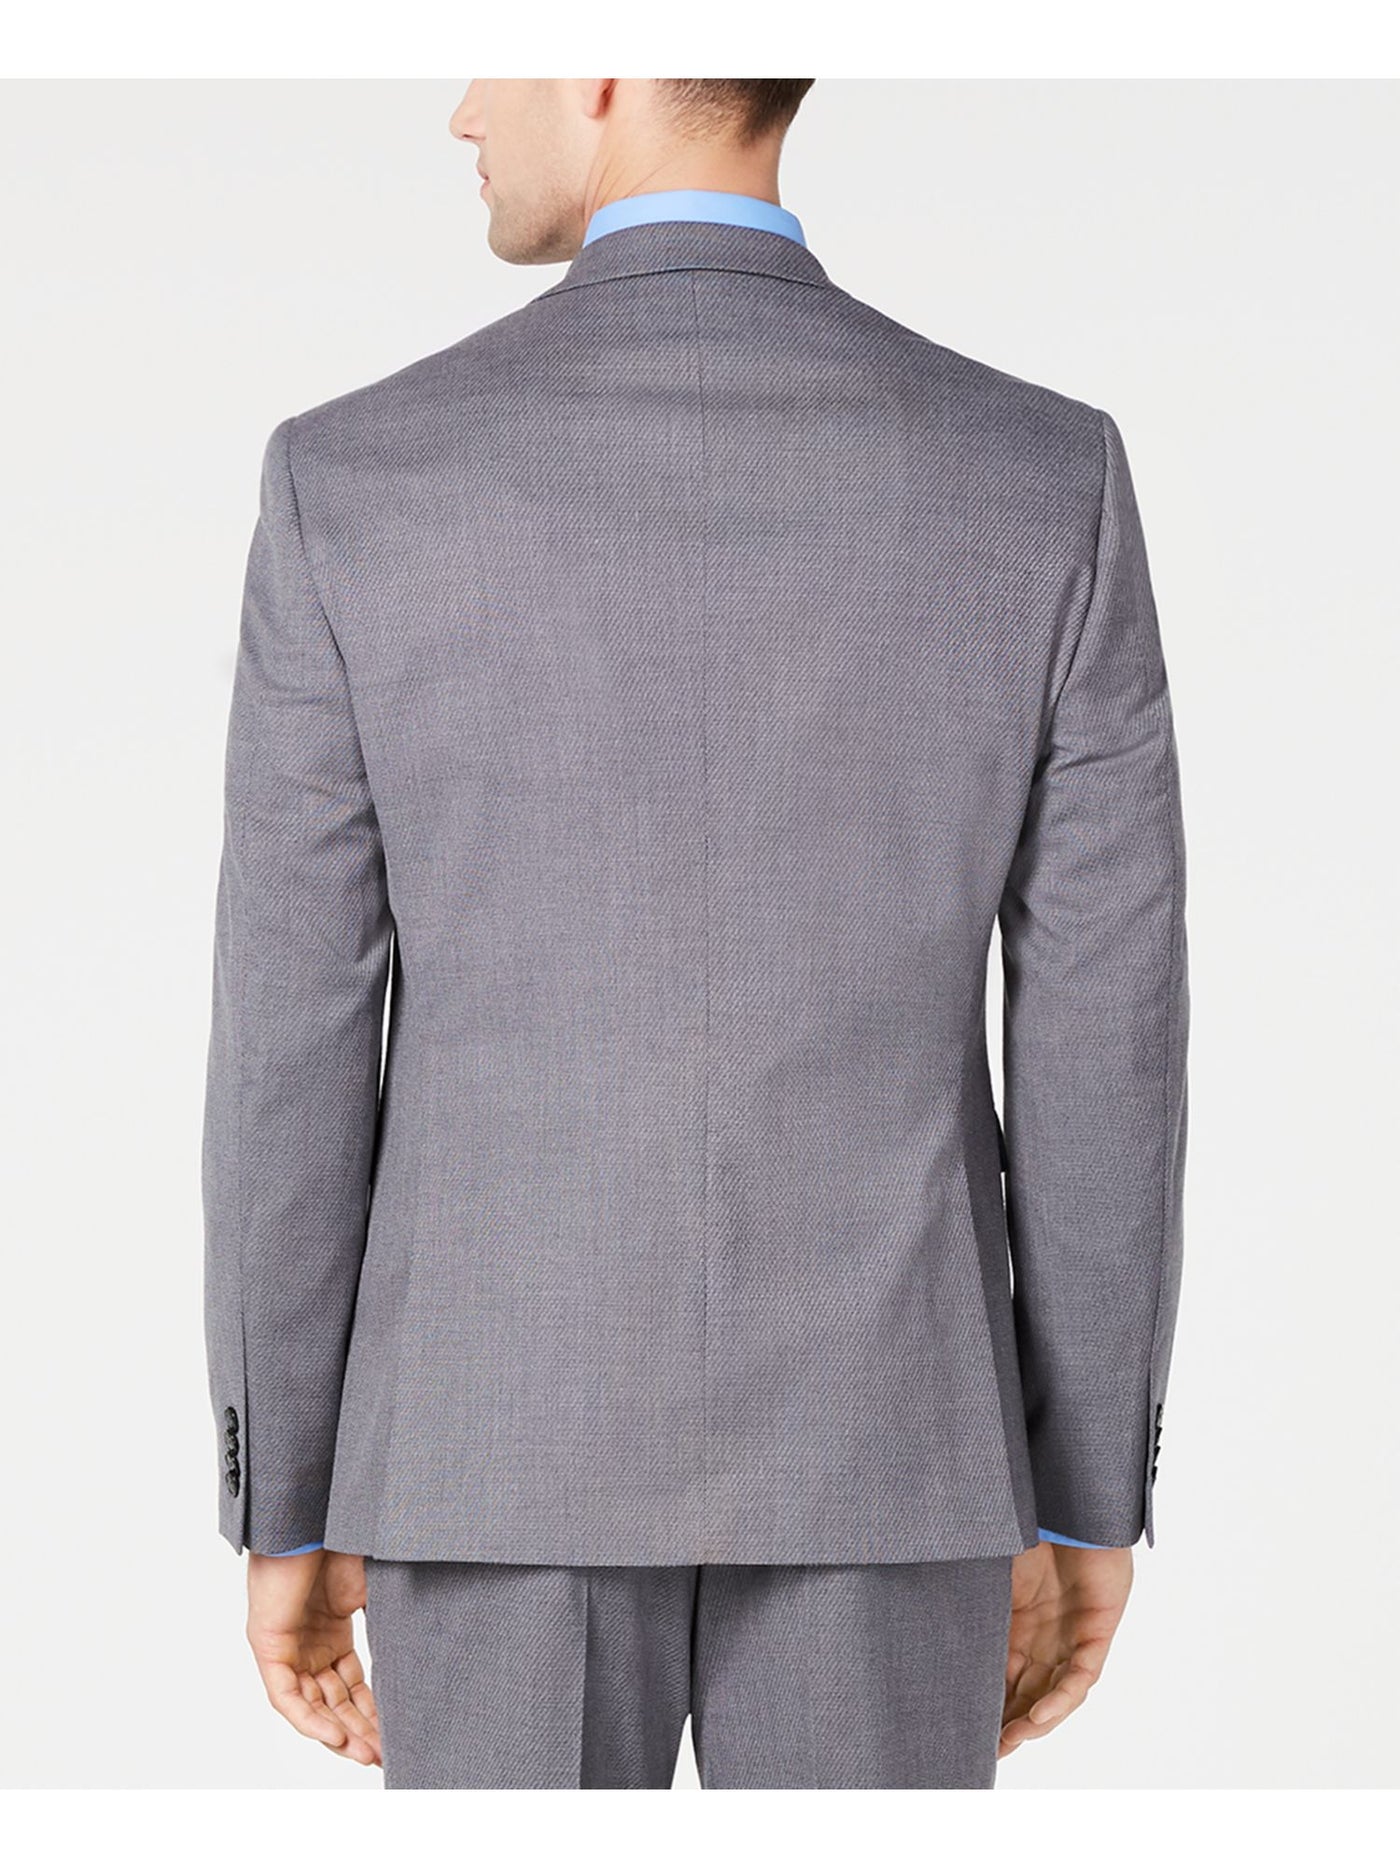 VINCE CAMUTO Mens Gray Single Breasted, Stretch, Slim Fit Wrinkle Resistant Suit Separate Blazer Jacket 44L